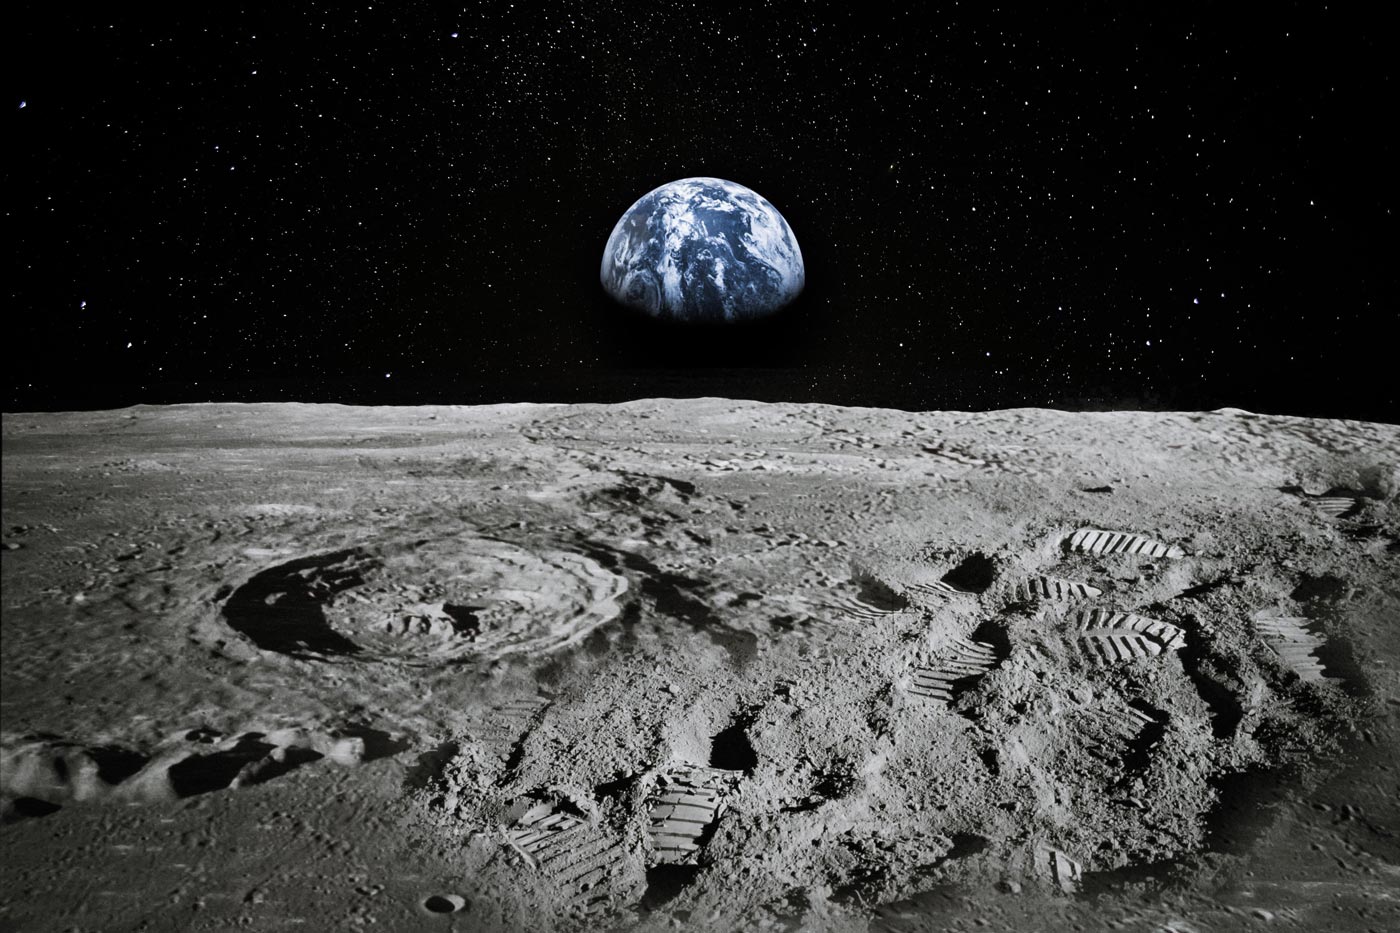 View of planet Earth from the Moon's surface.